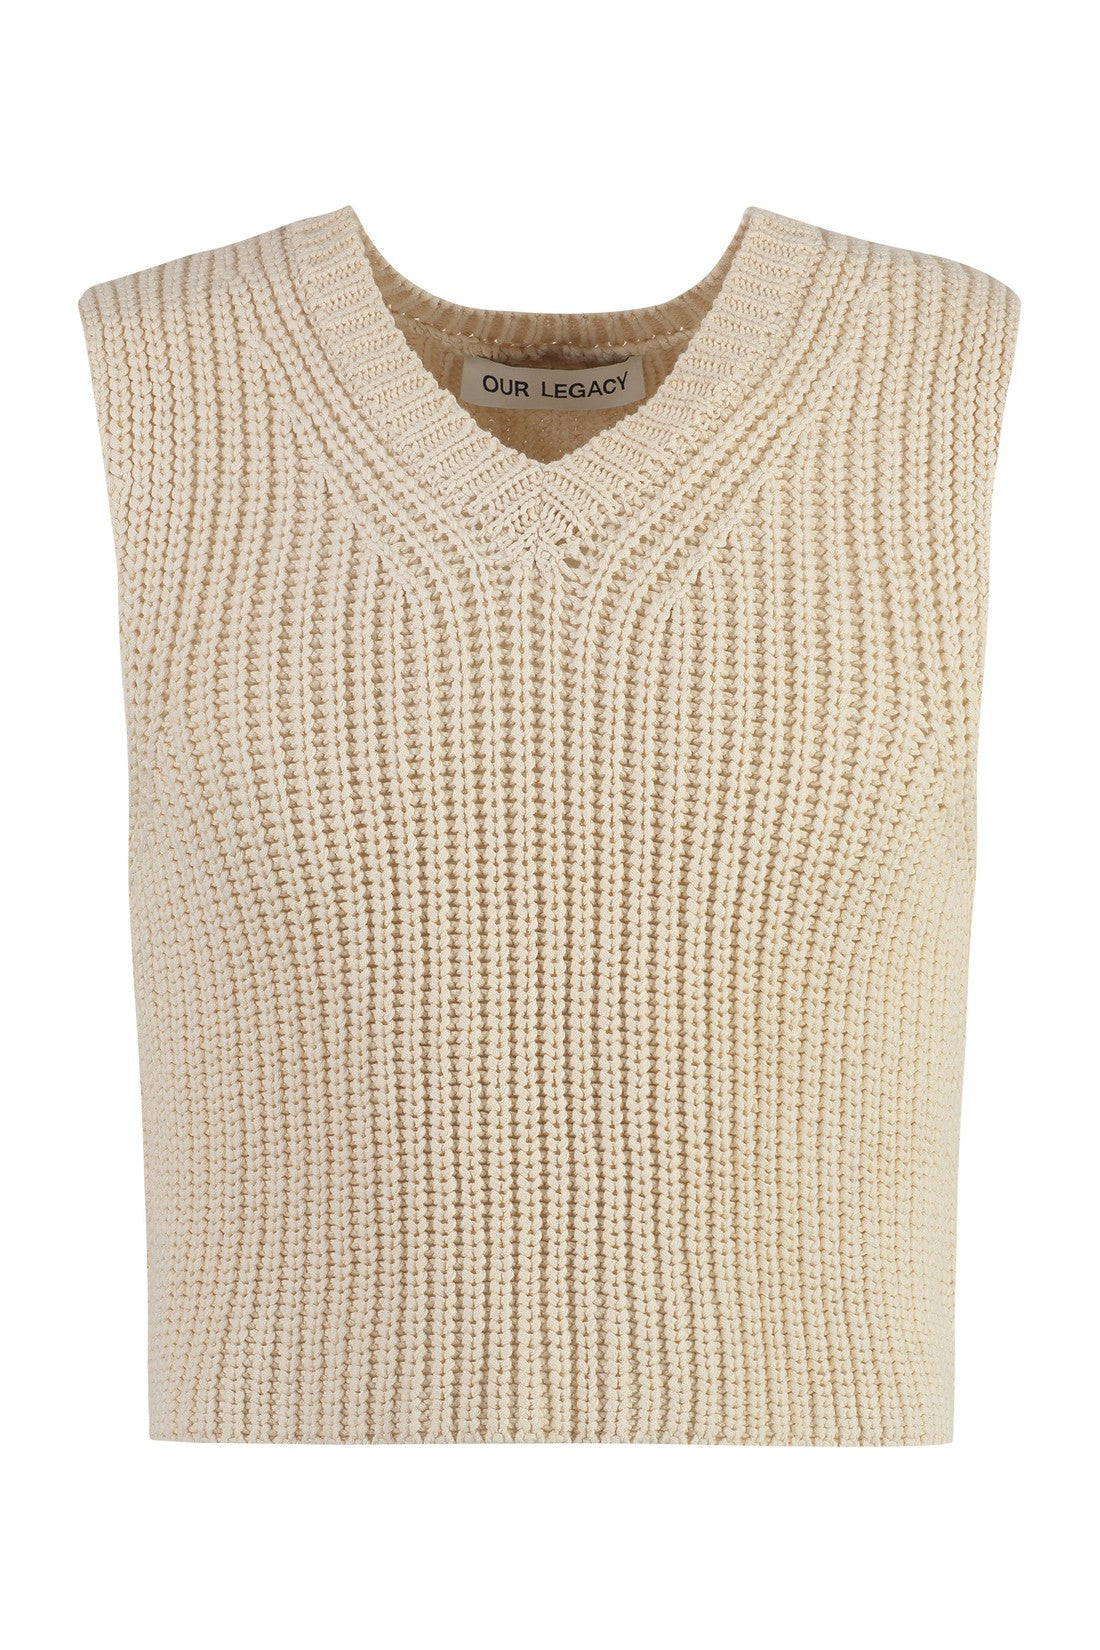 Our Legacy-OUTLET-SALE-Intact knitted vest-ARCHIVIST